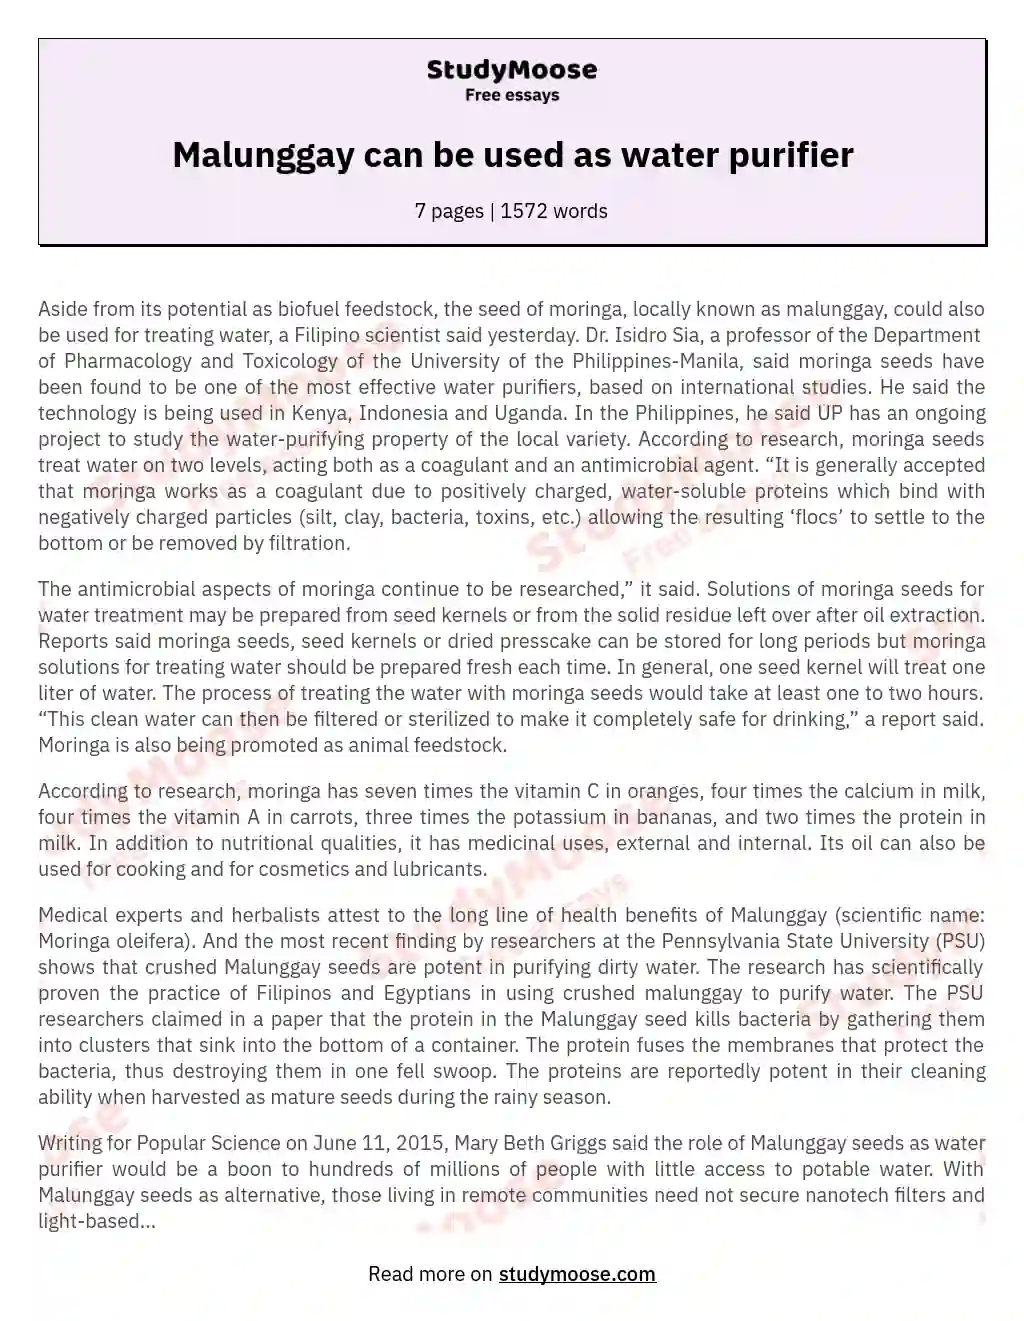 Malunggay can be used as water purifier essay